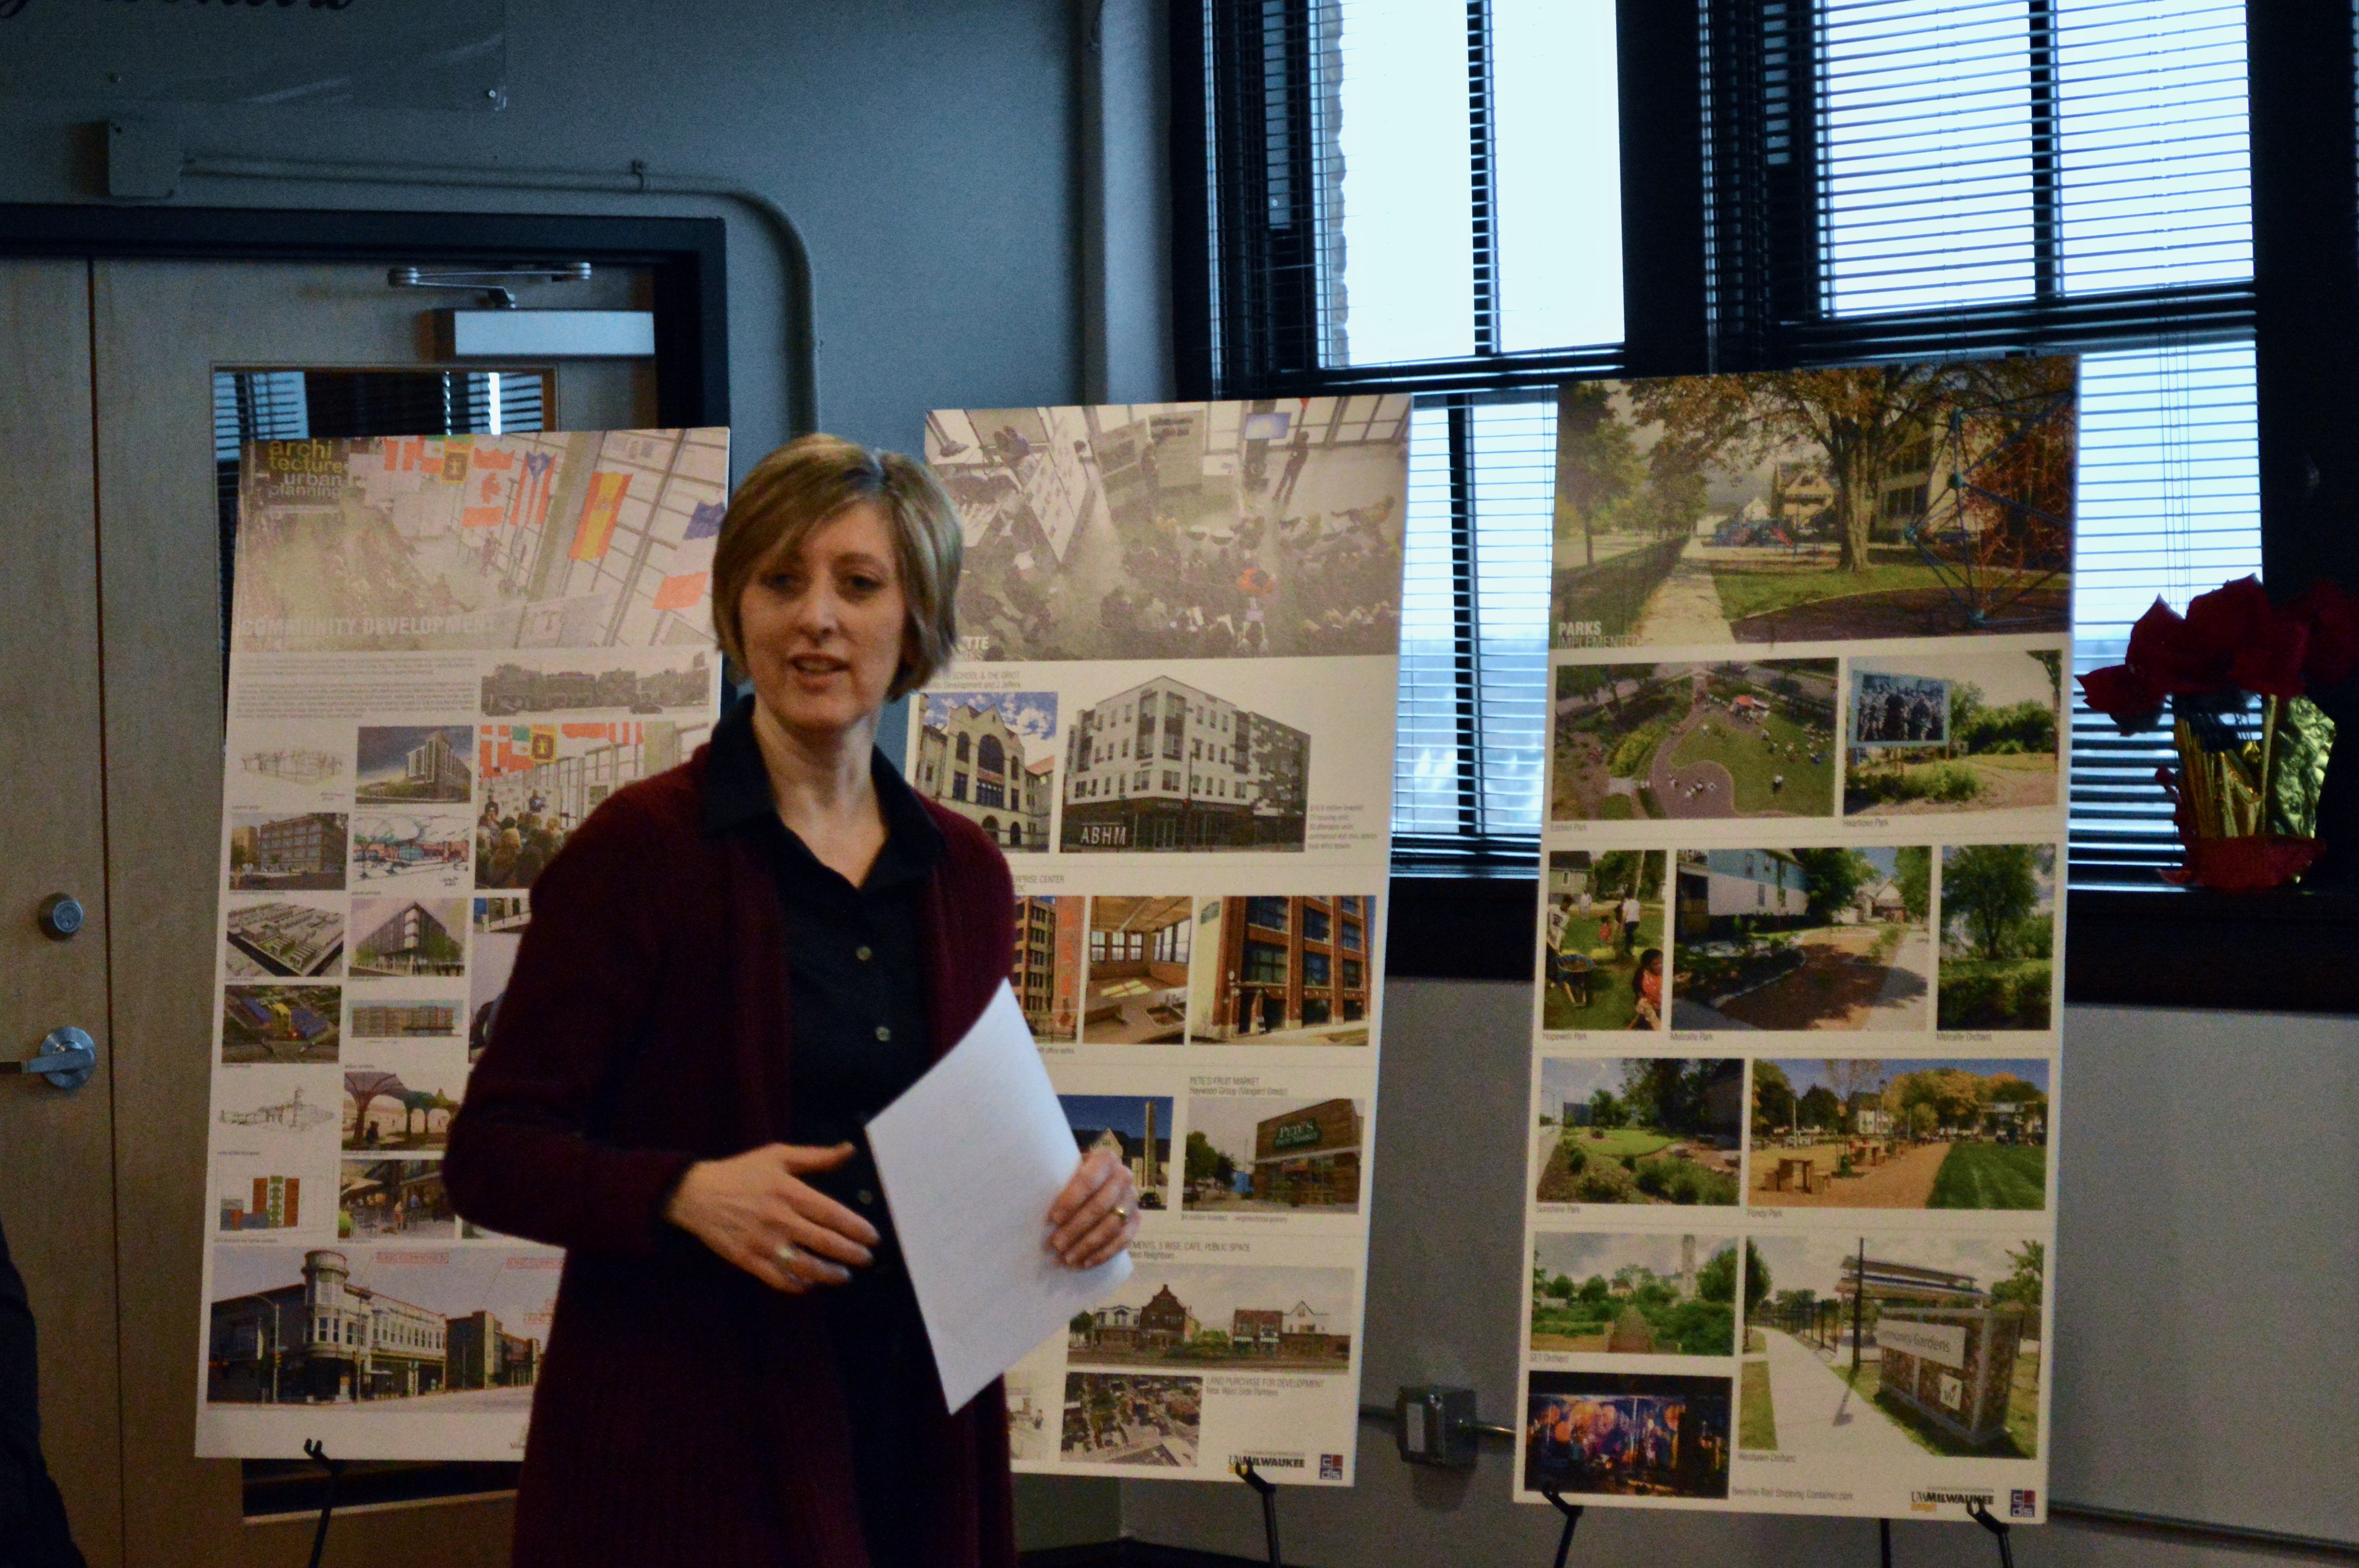 Carolyn Esswein explains her process of charrette, where she brings together residents, funders and designers for community-based development planning. Photo by Analise Pruni/NNS.